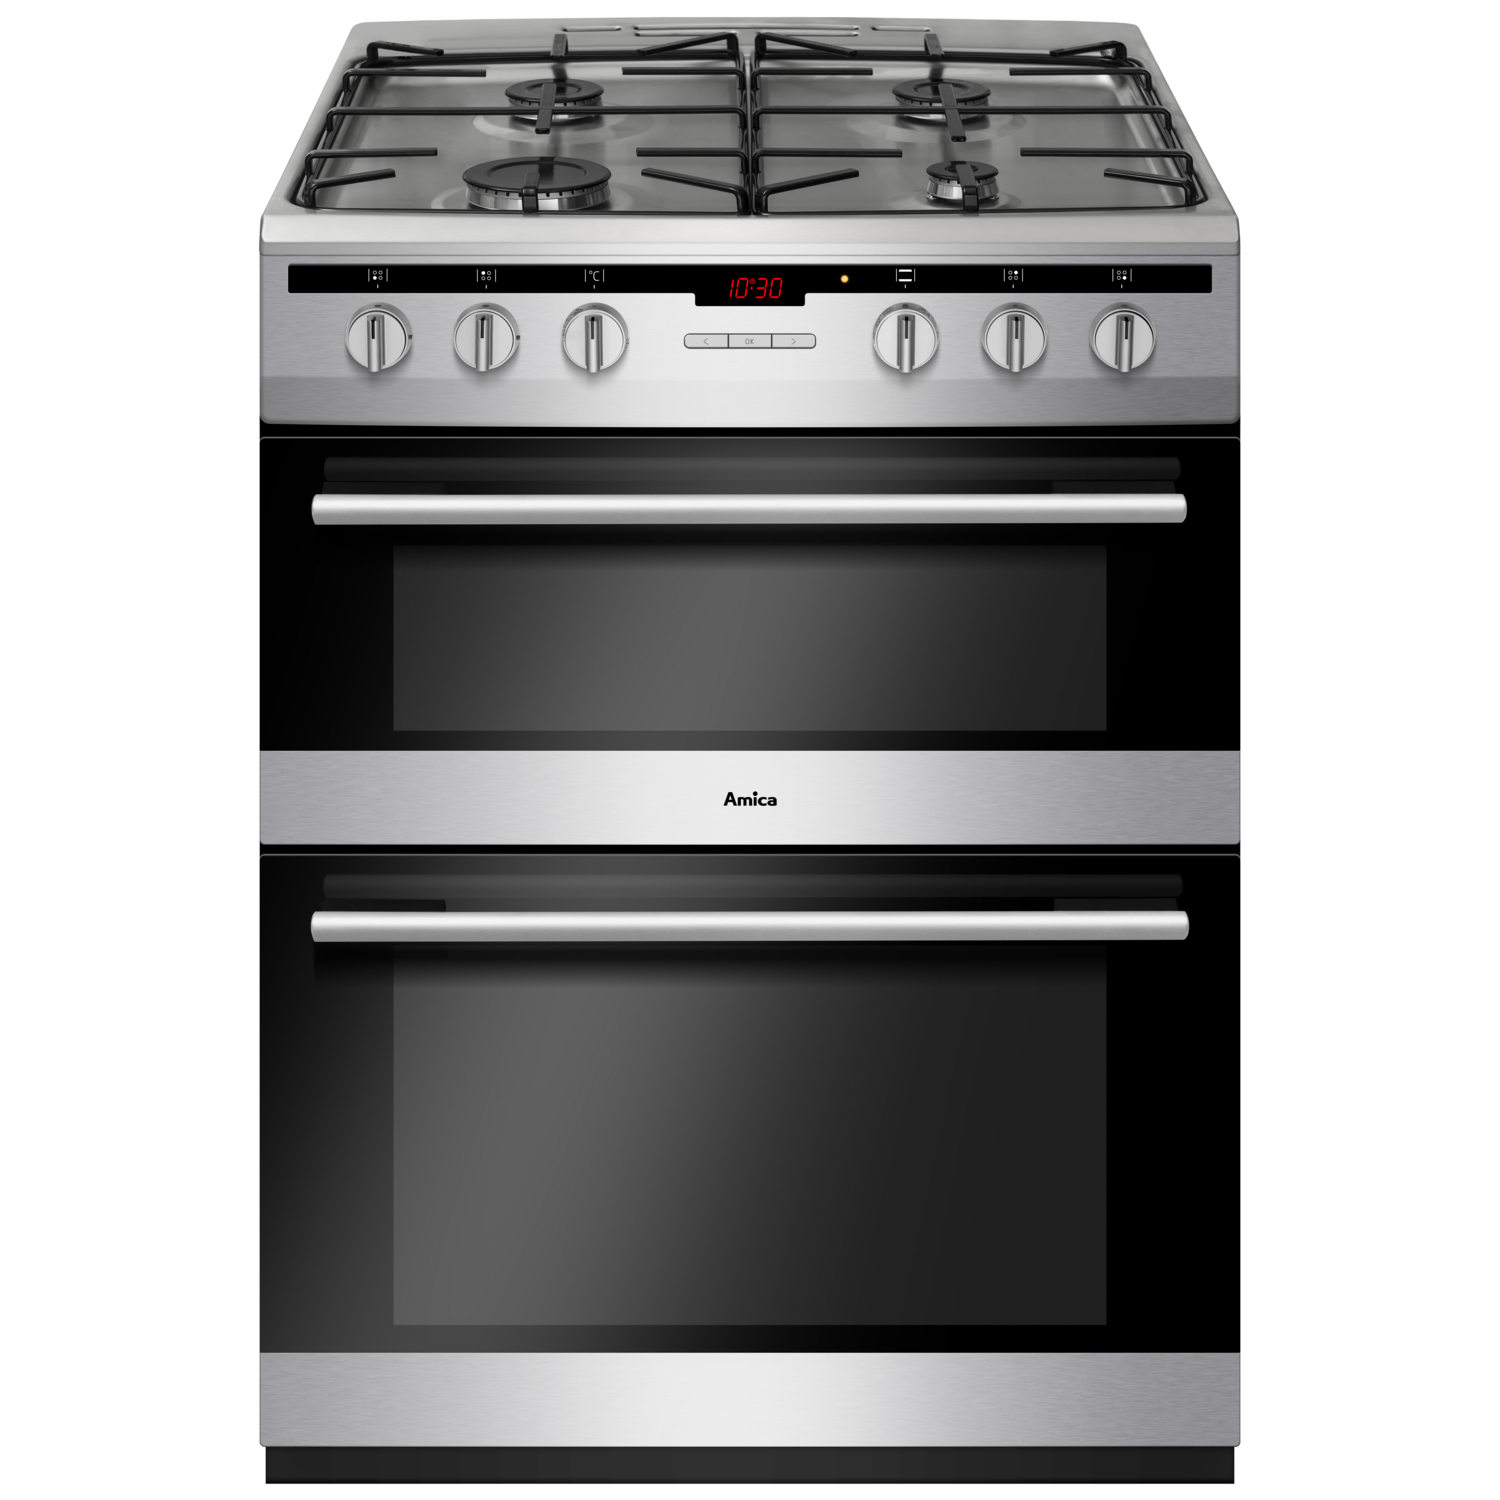 Amica 60cm Double Oven Gas Cooker with Catalytic Liners - Stainless Steel